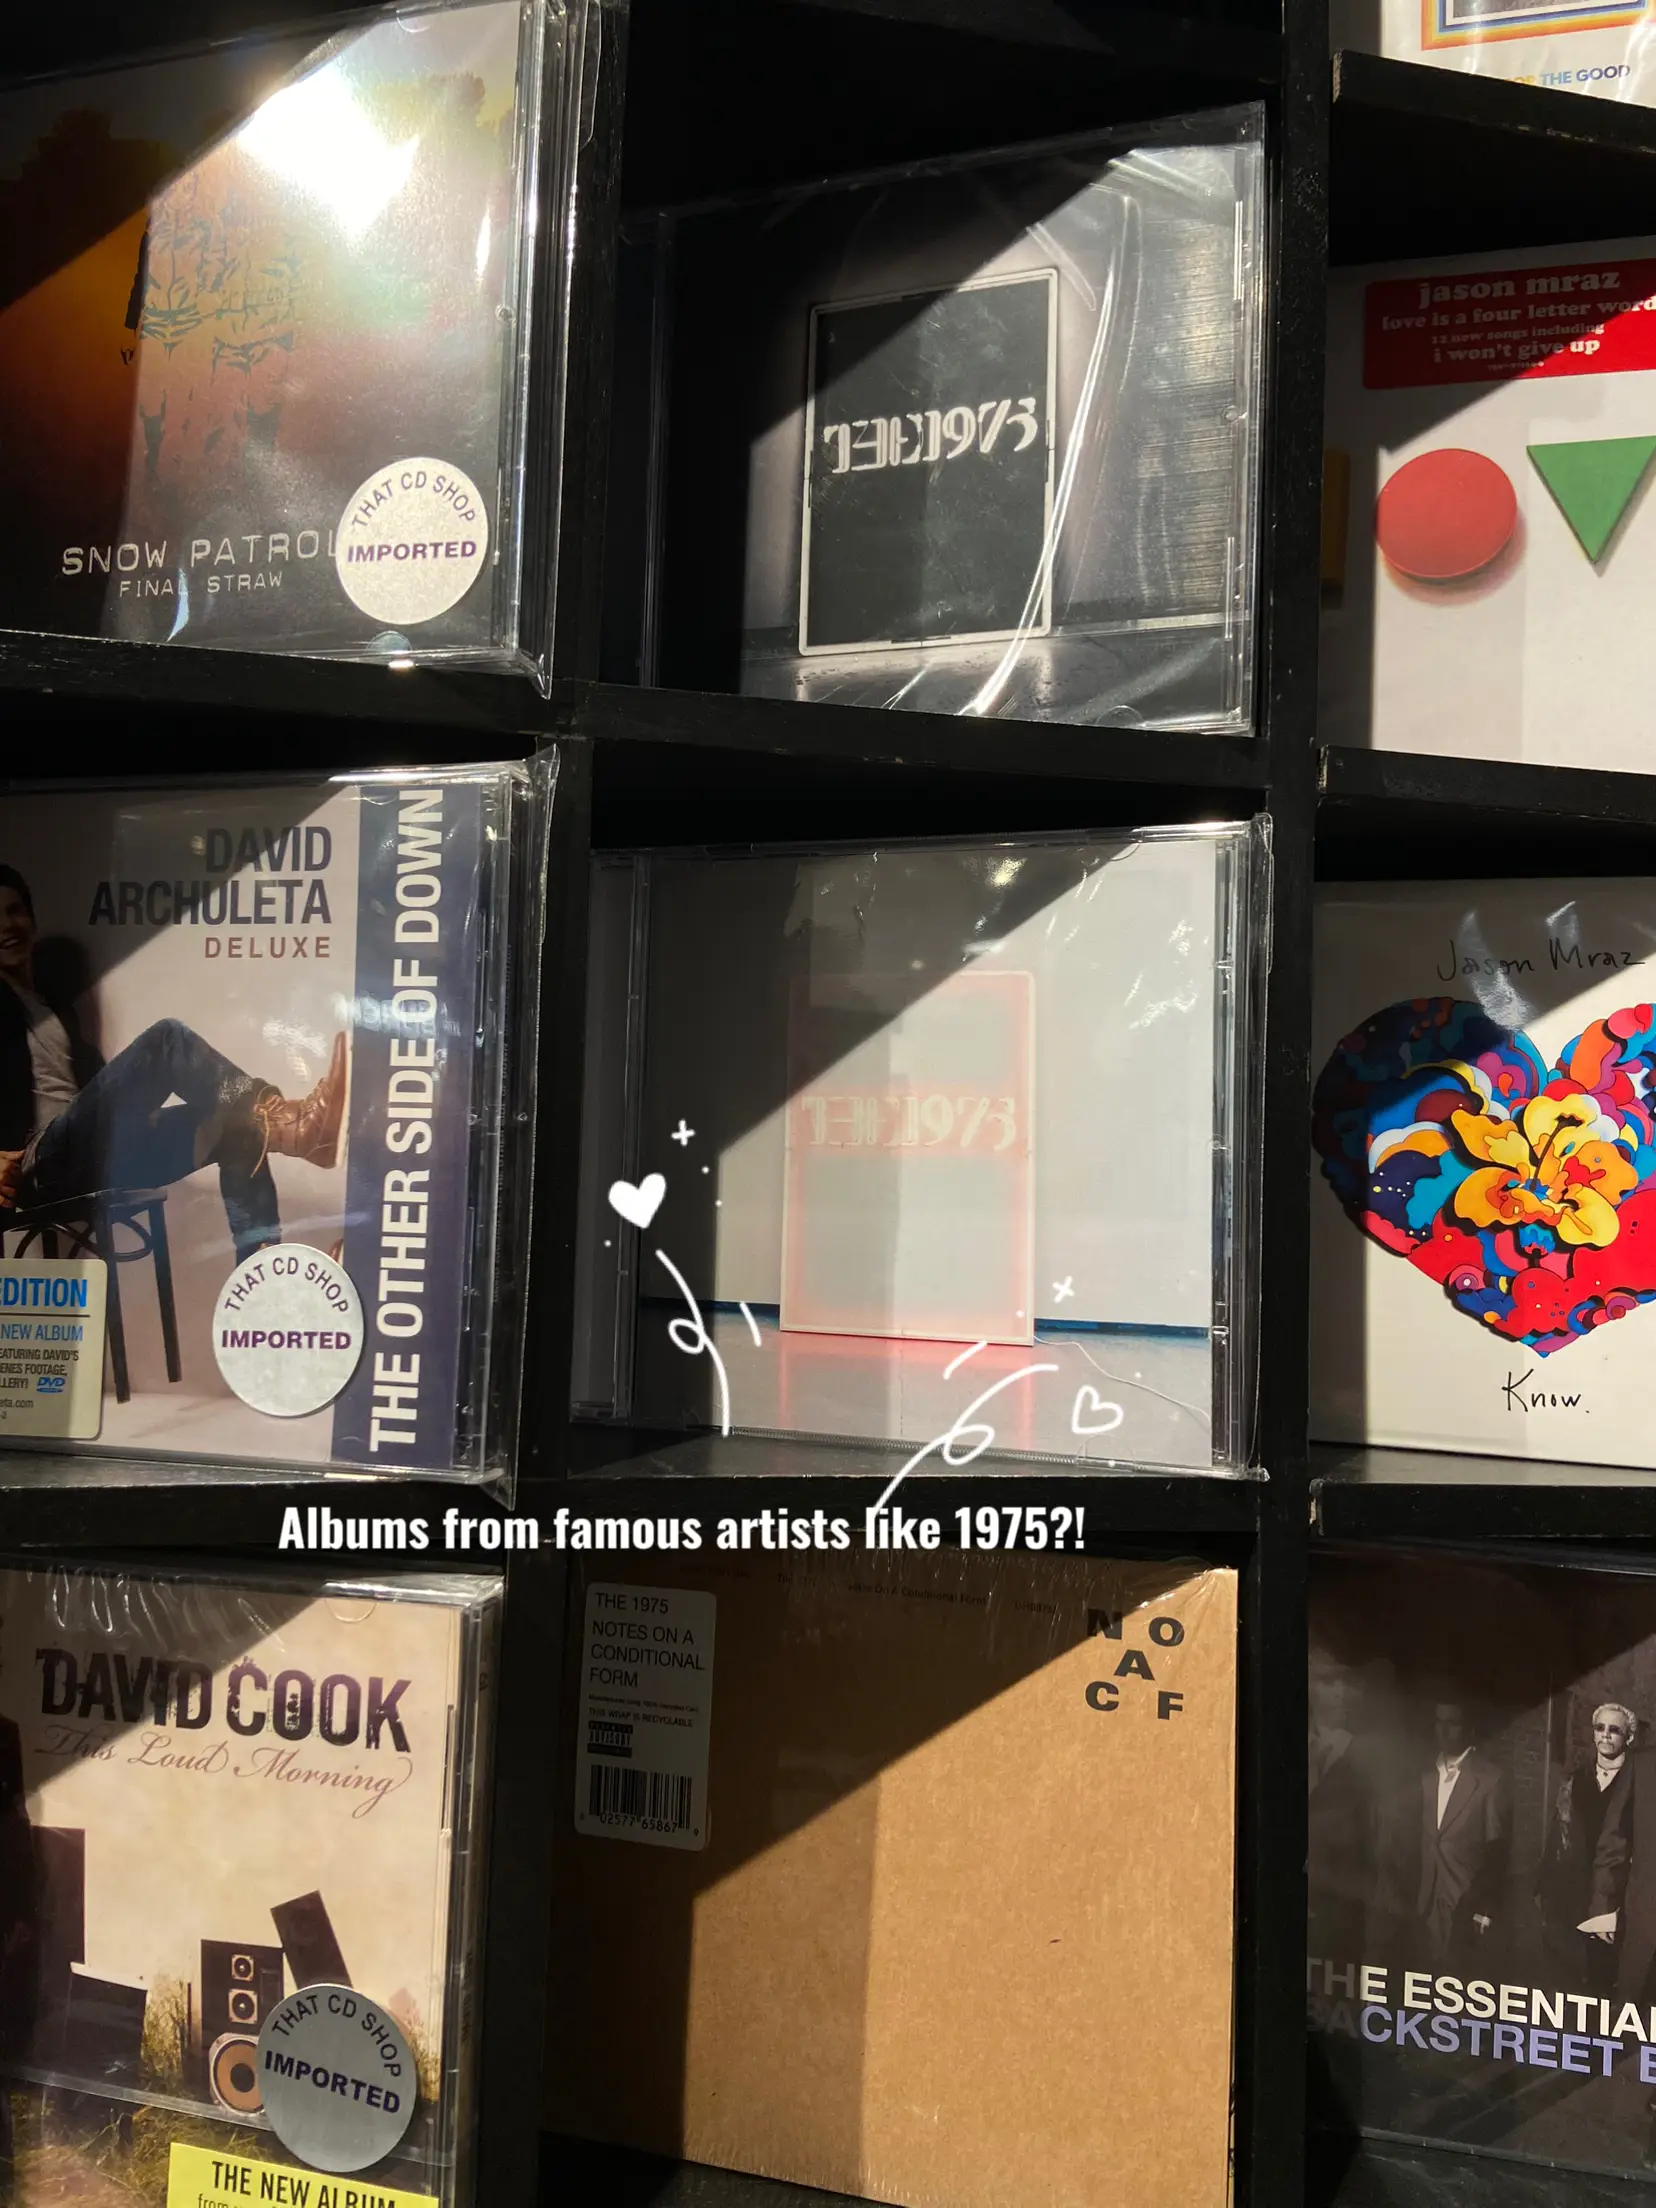 FAN OF VINYL & CDs? LIMITED EDTS AT WISMA ATRIA 🌟's images(2)